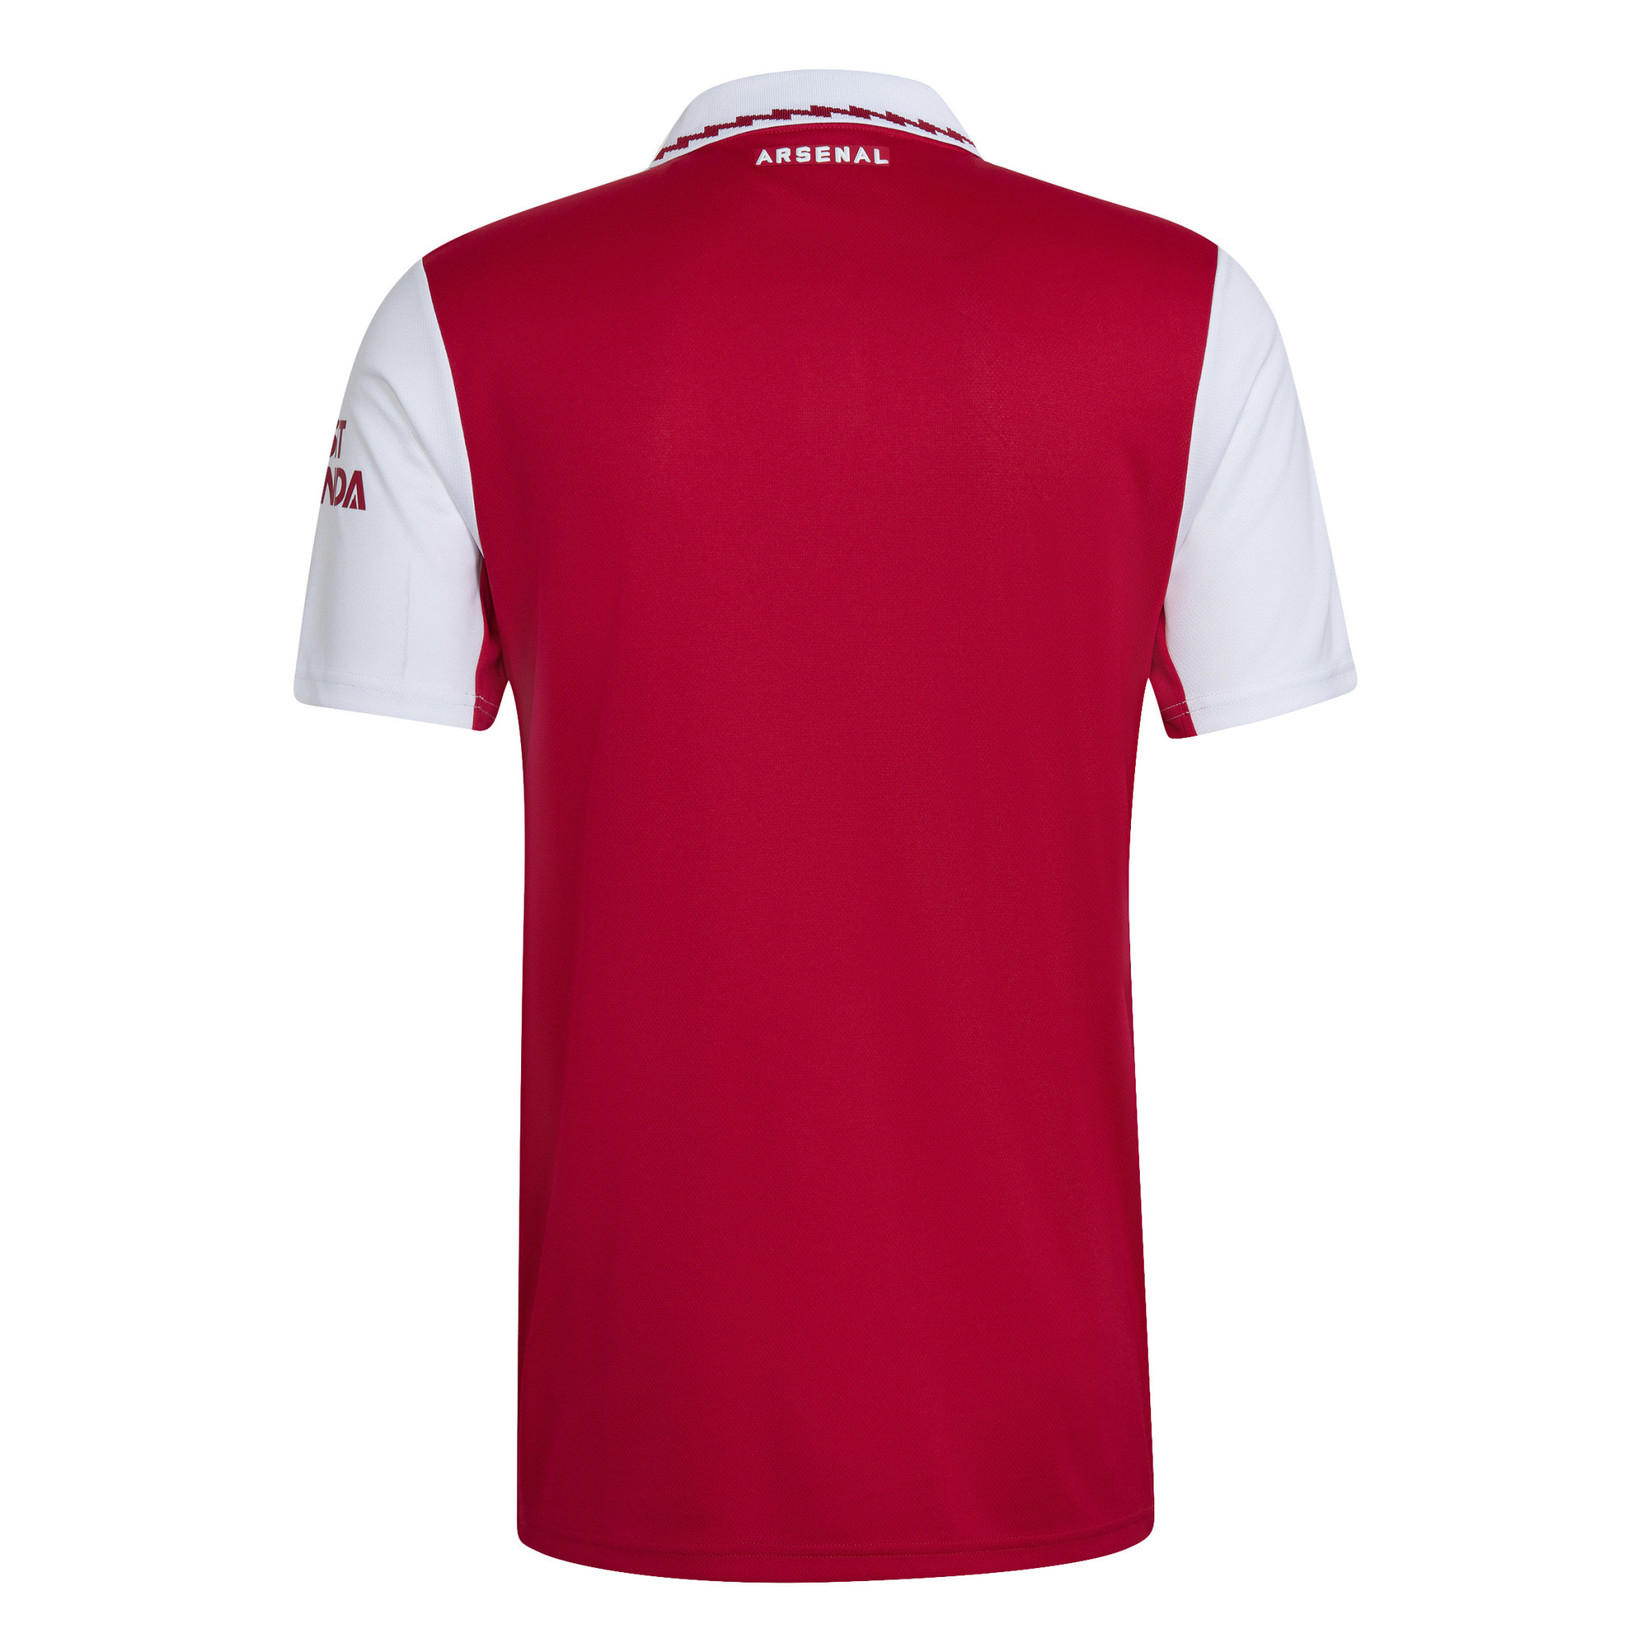 ADIDAS ARSENAL 22/23 HOME JERSEY (RED/WHITE)